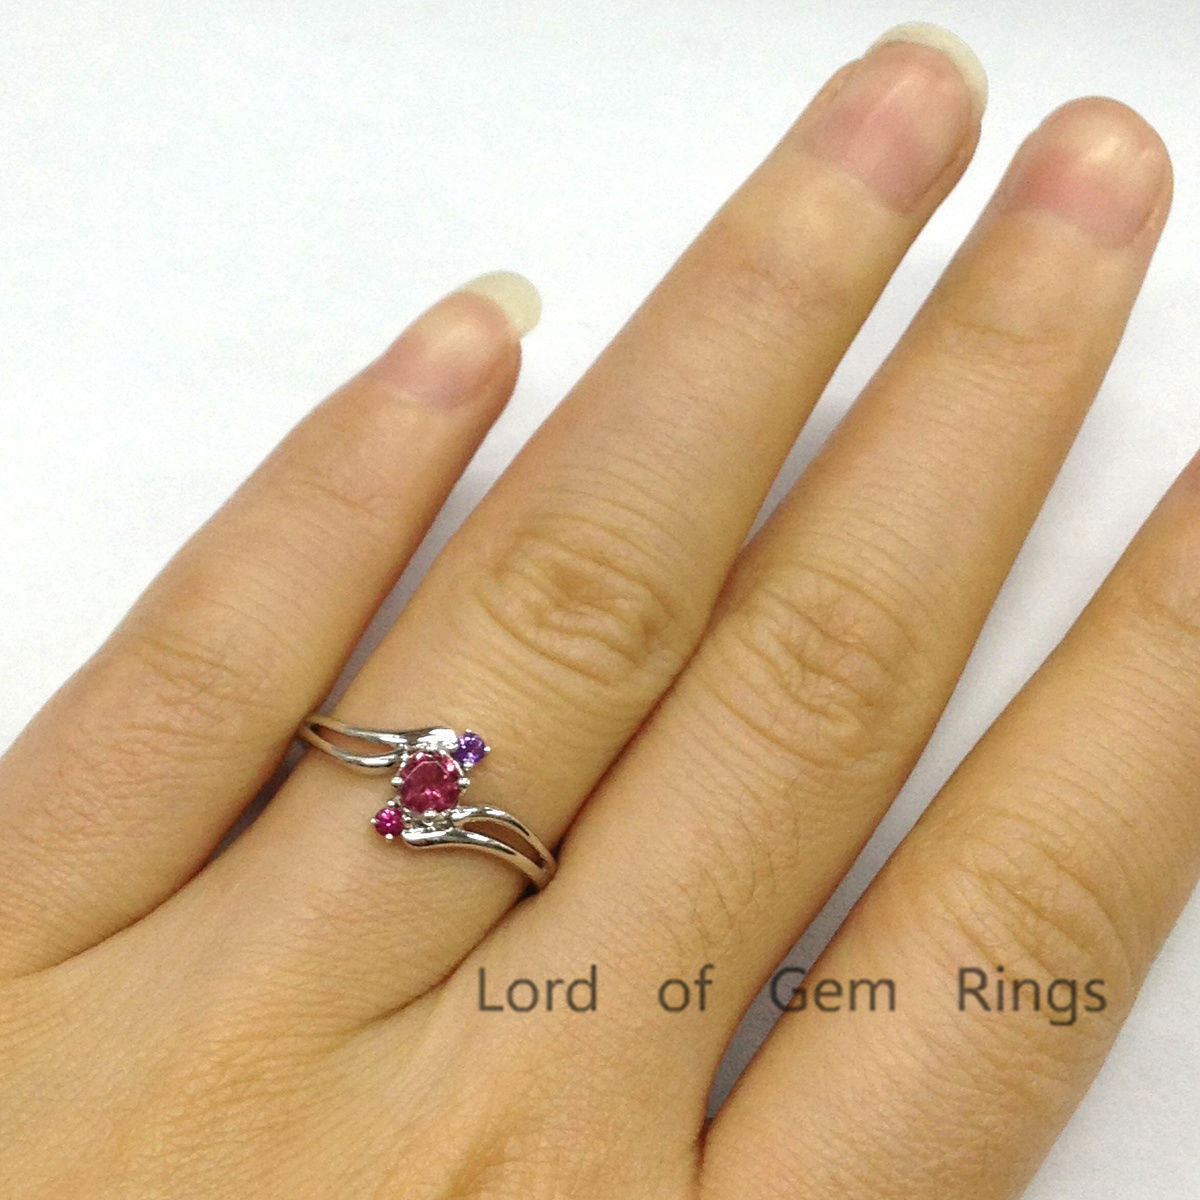 Round Red Tourmaline Engagement Ring Ruby&Amethyst Wedding 14K White Gold, 4mm, 2mm - Lord of Gem Rings - 5